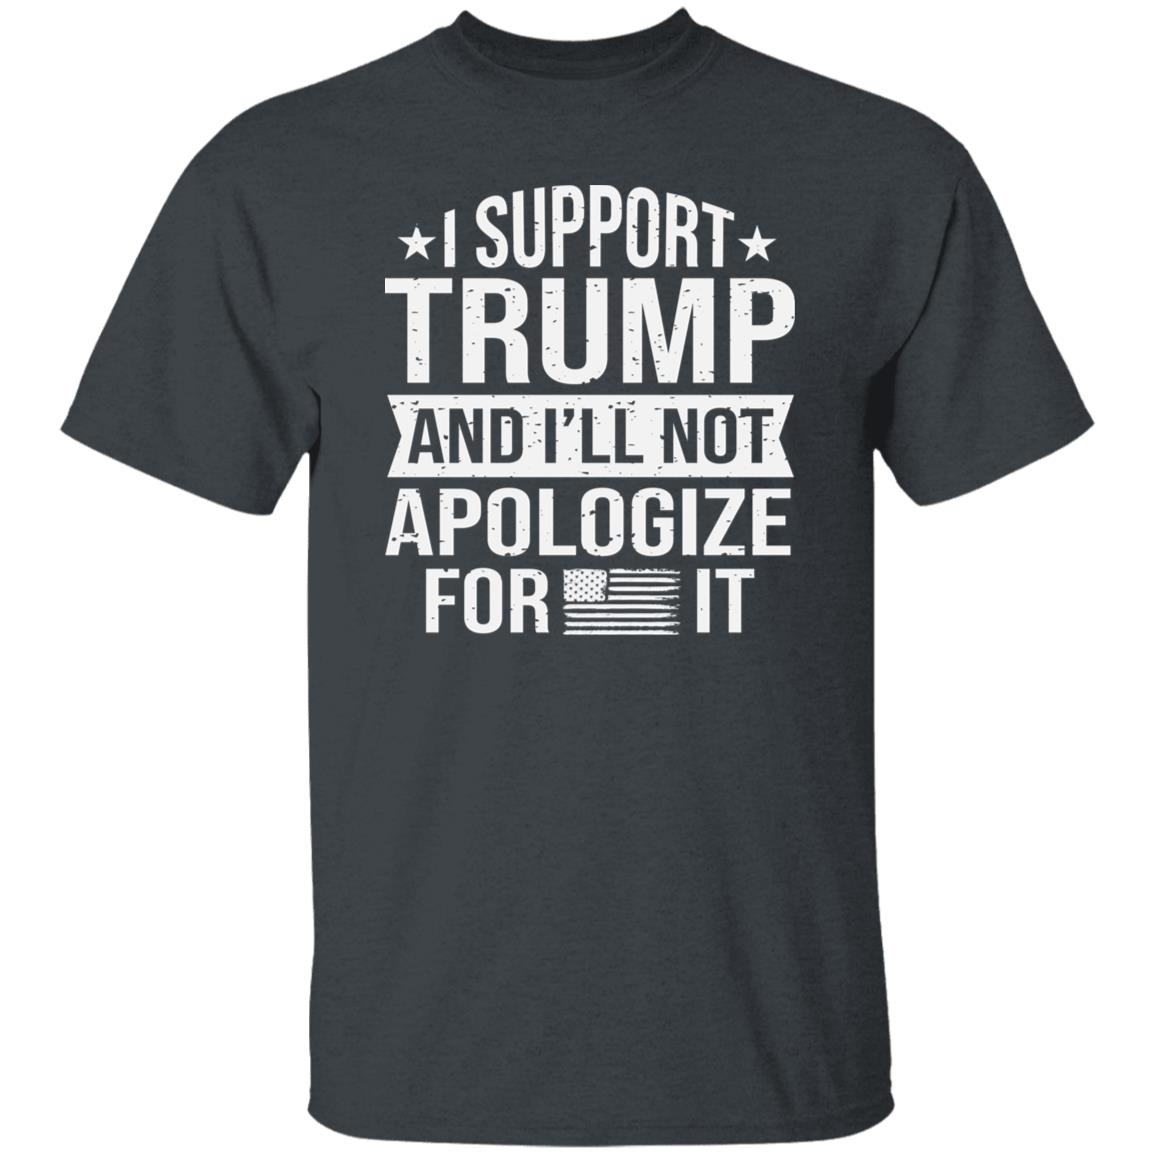 I Support and I'll Not Apologize For it Trump Shirt